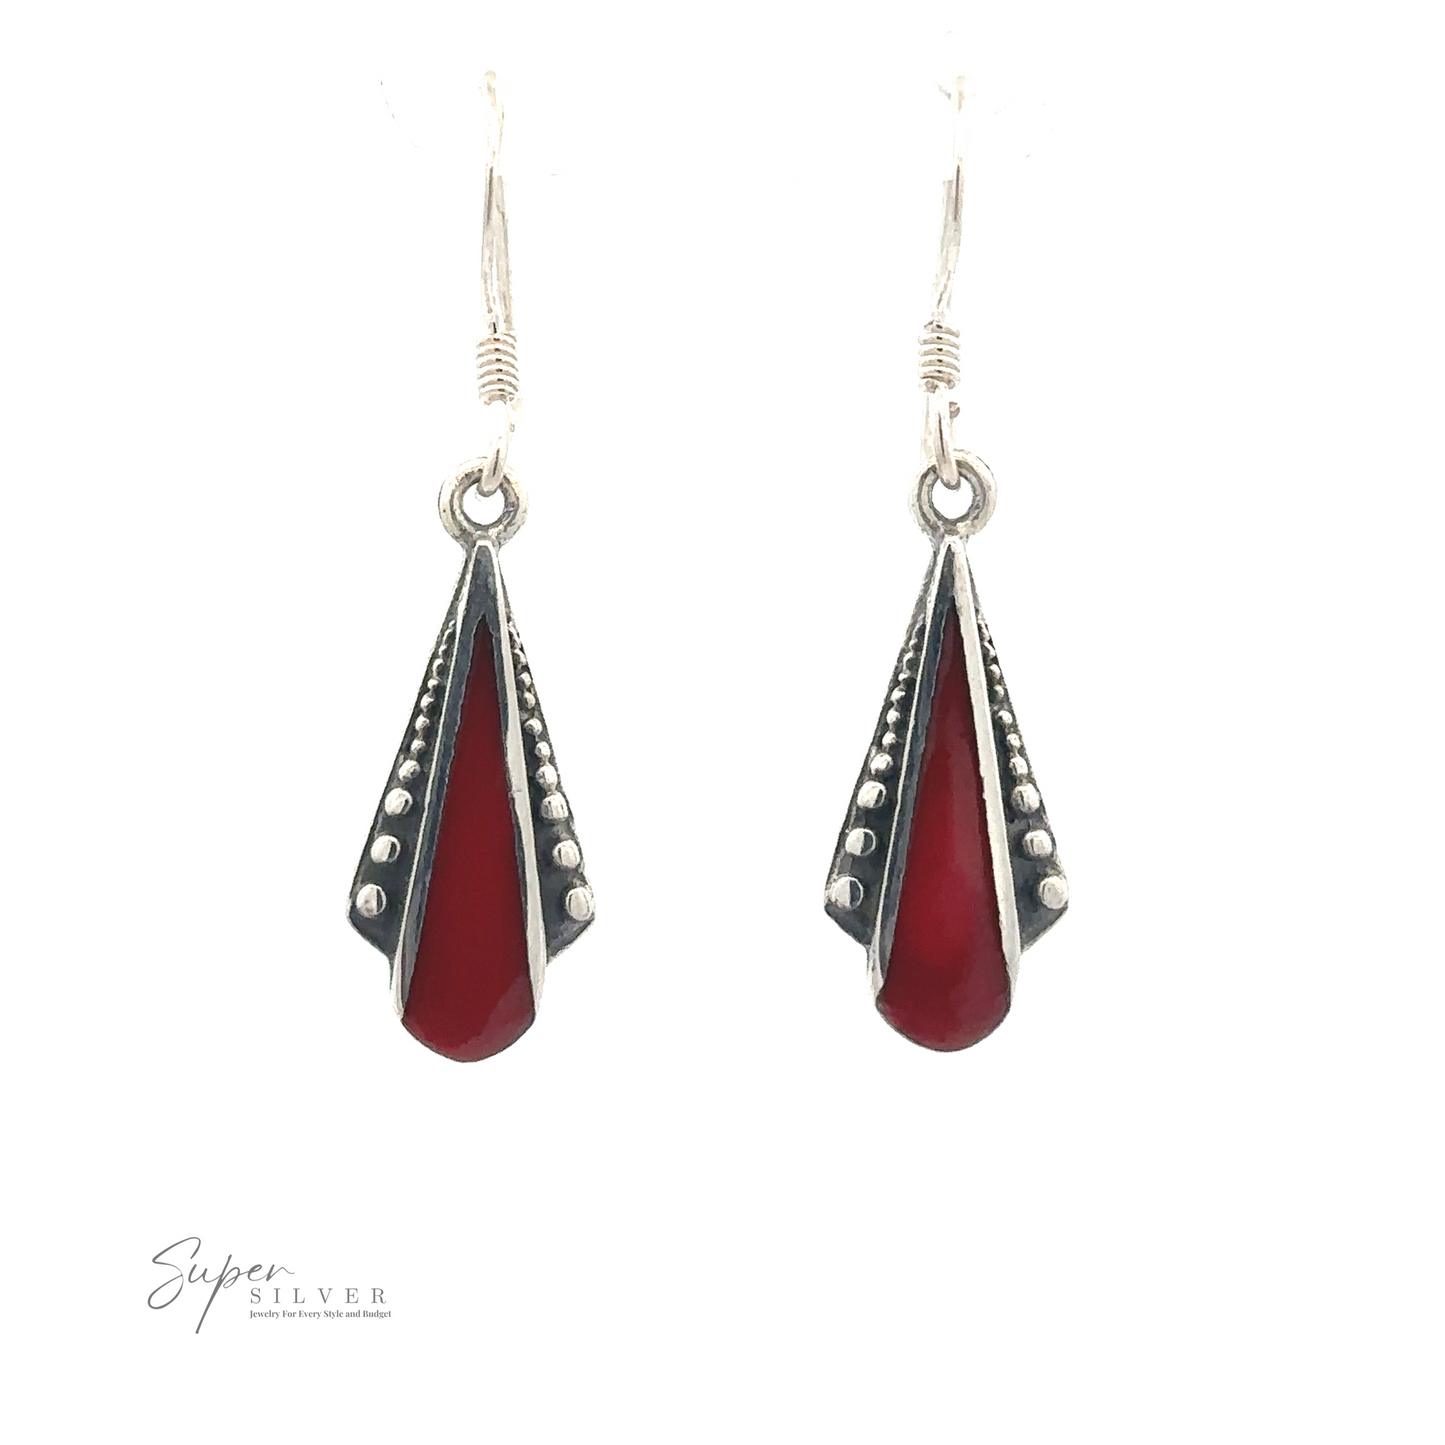 
                  
                    A pair of Inlaid Teardrop Shaped Bali Inspired Earrings with red gemstone drops and sterling silver accents, featuring a cone-like design and hooked clasps, displayed on a white background.
                  
                